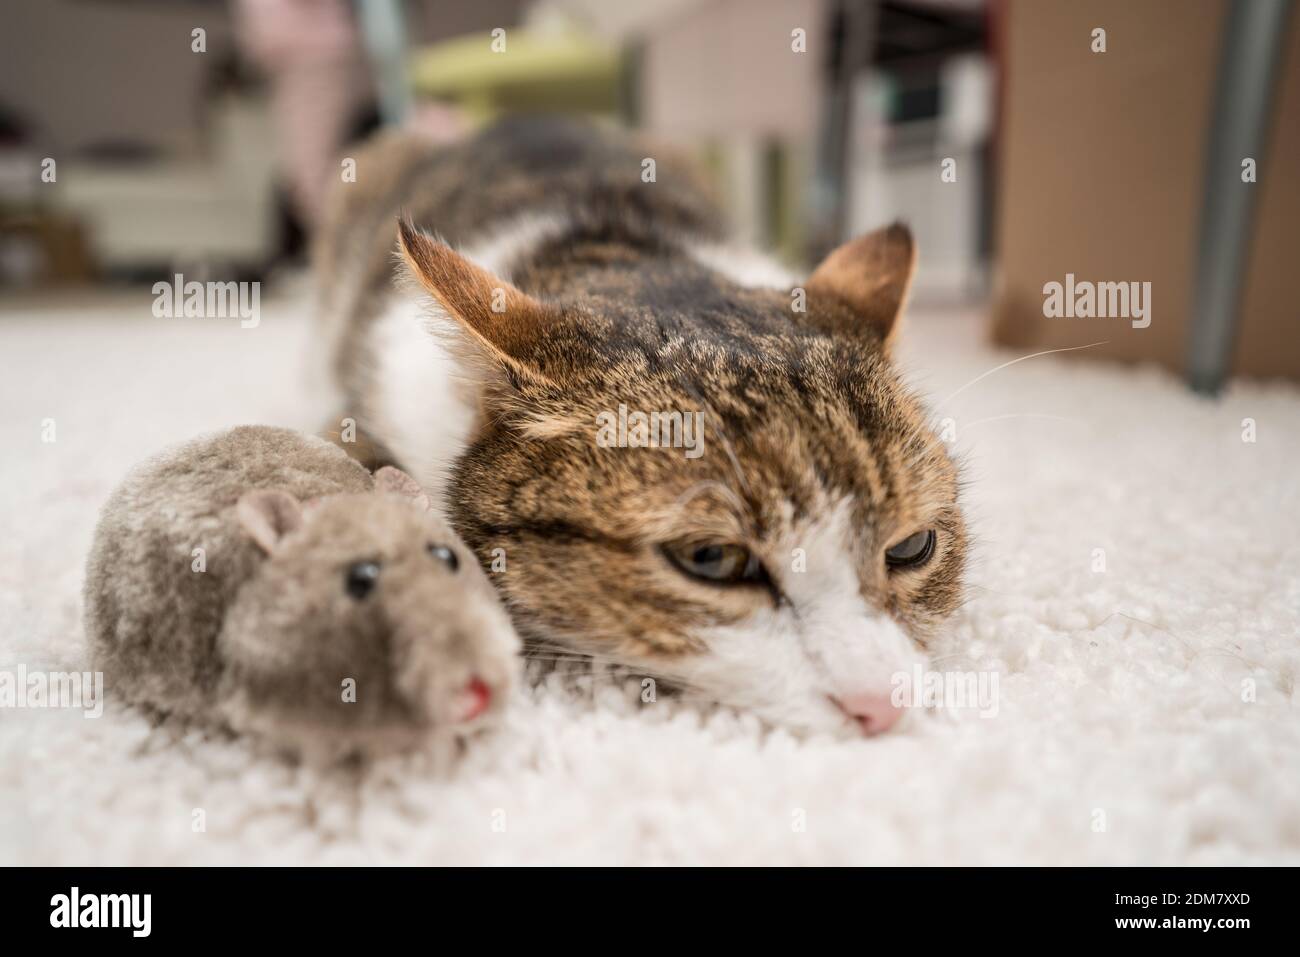 lazy cat sleeping with mouse Stock Photo